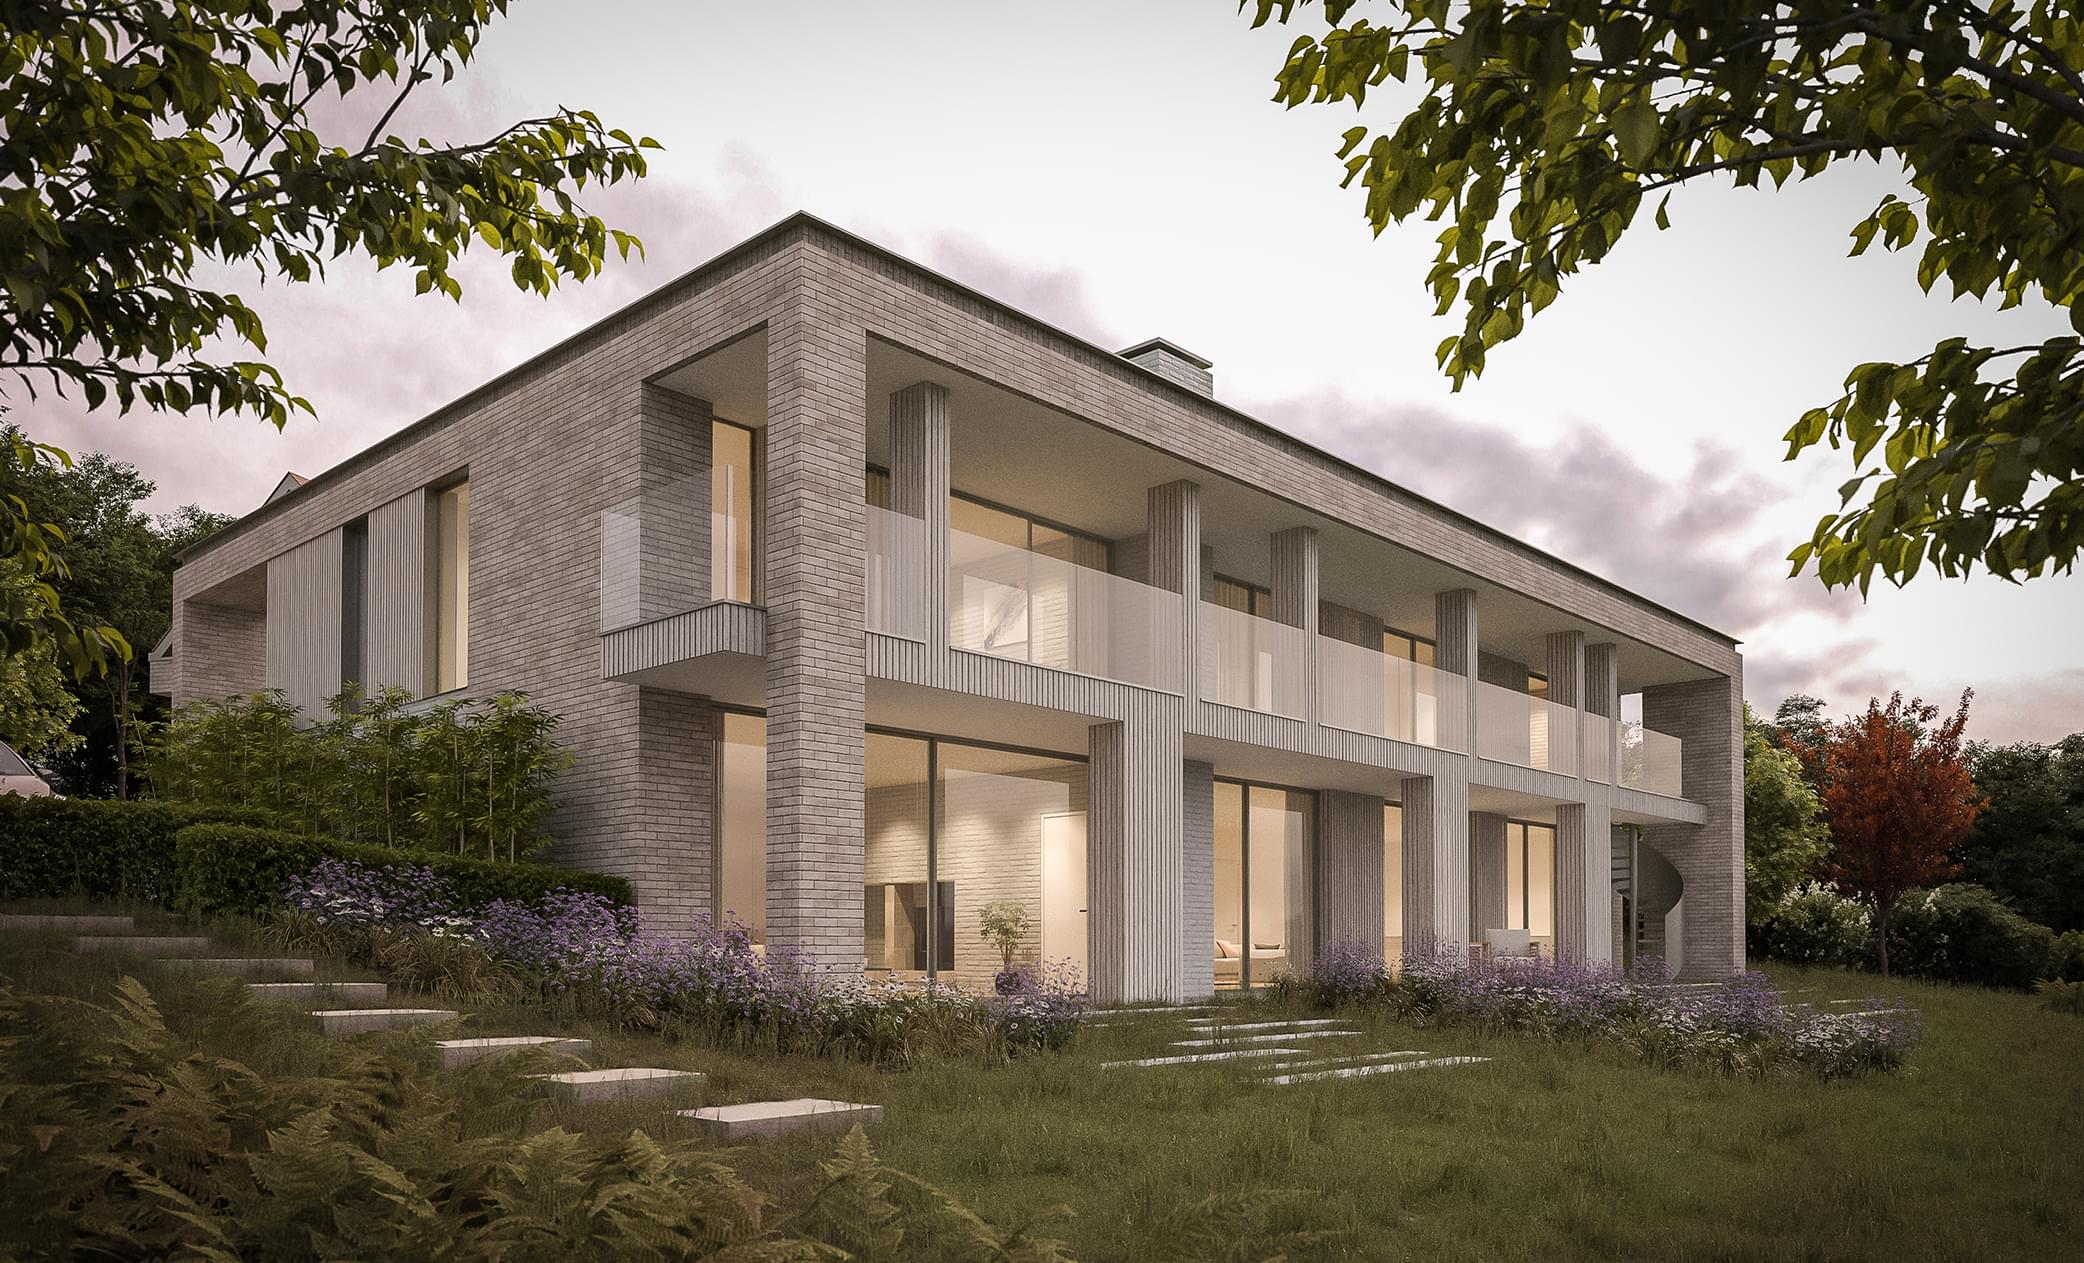 Planning Granted for Contemporary Dwelling